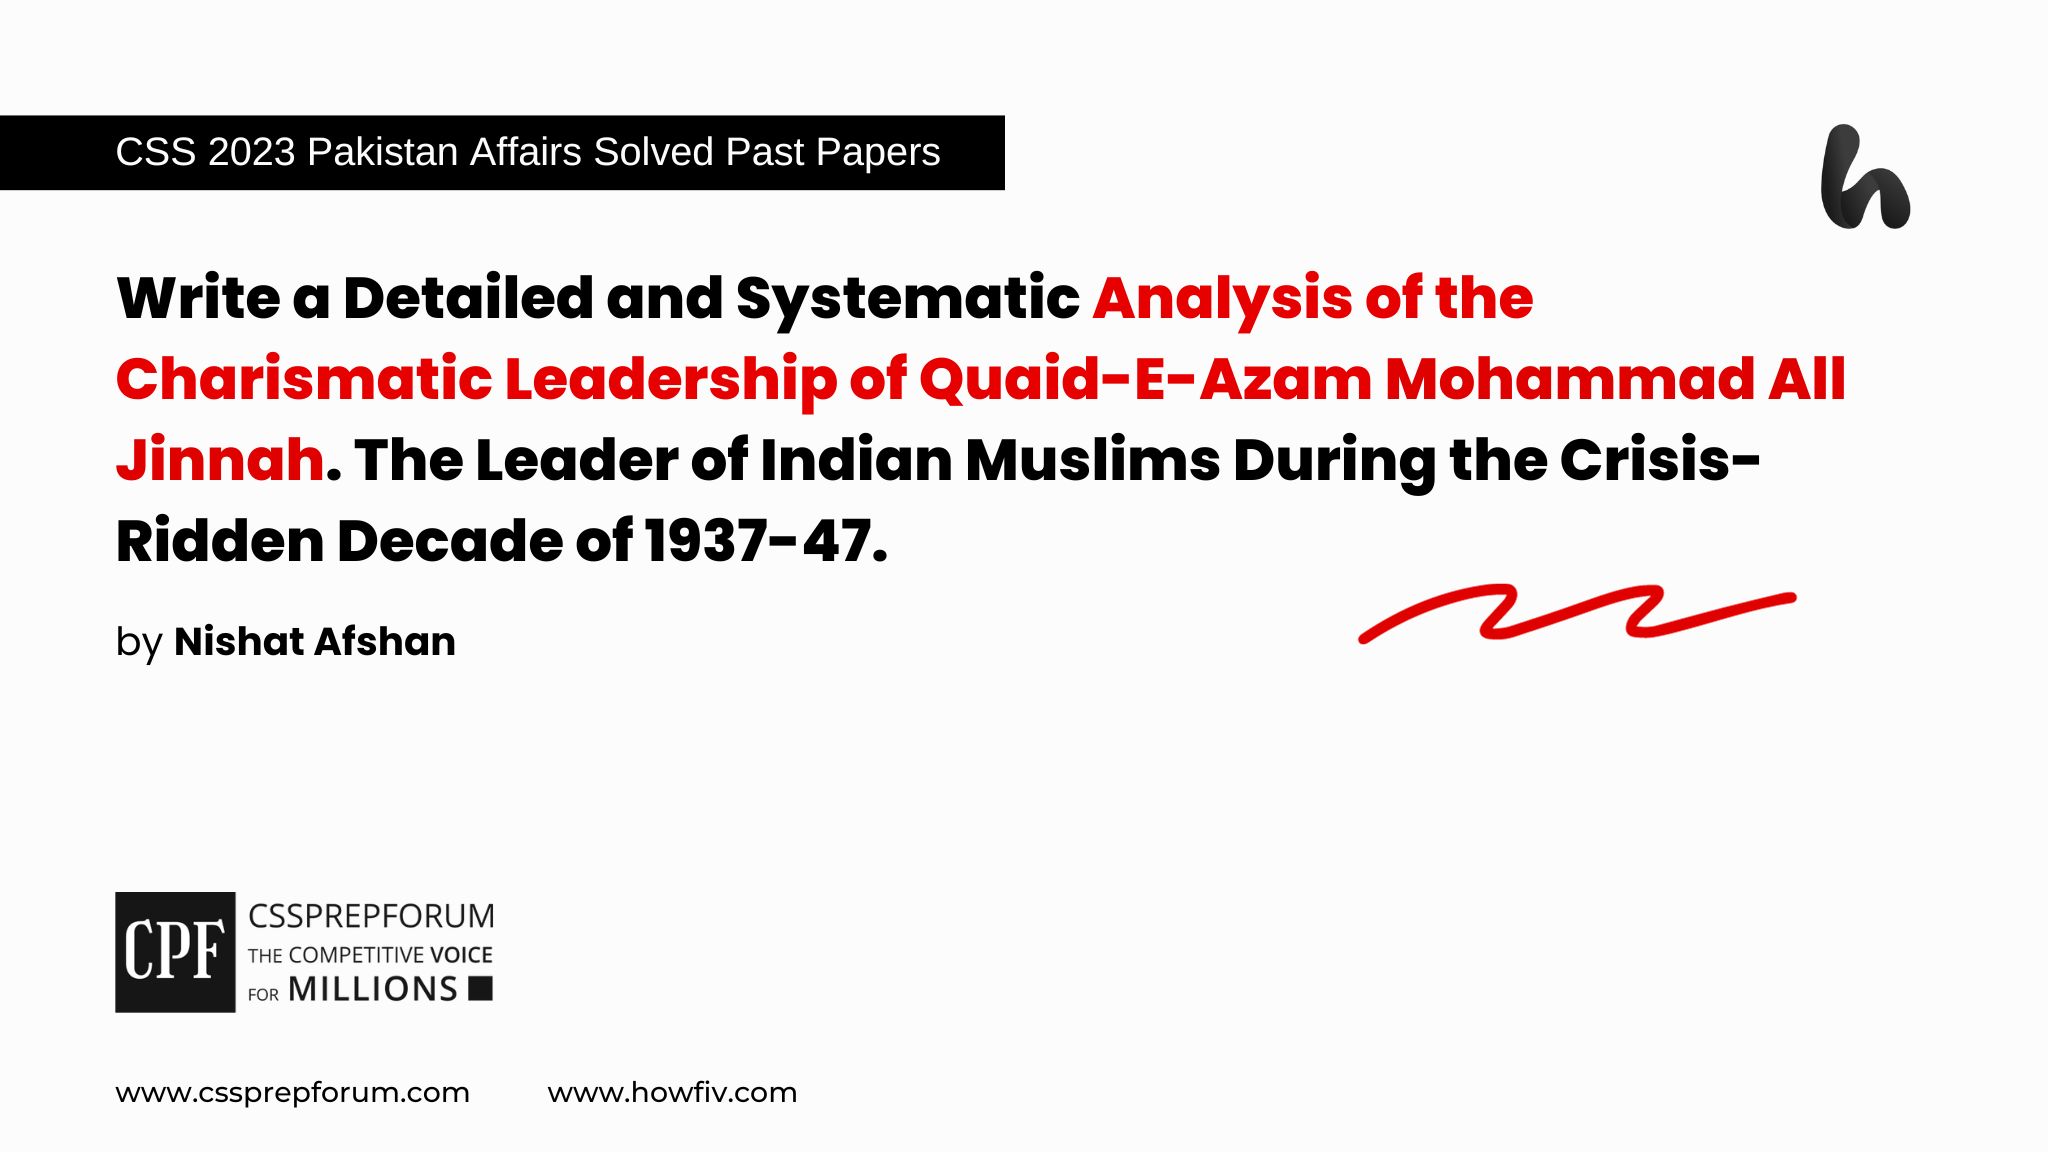 Write a Detailed and Systematic Analysis of the Charismatic Leadership of Quaid-E-Azam Mohammad All Jinnah. The Leader of Indian Muslims During the Crisis-Ridden Decade of 1937